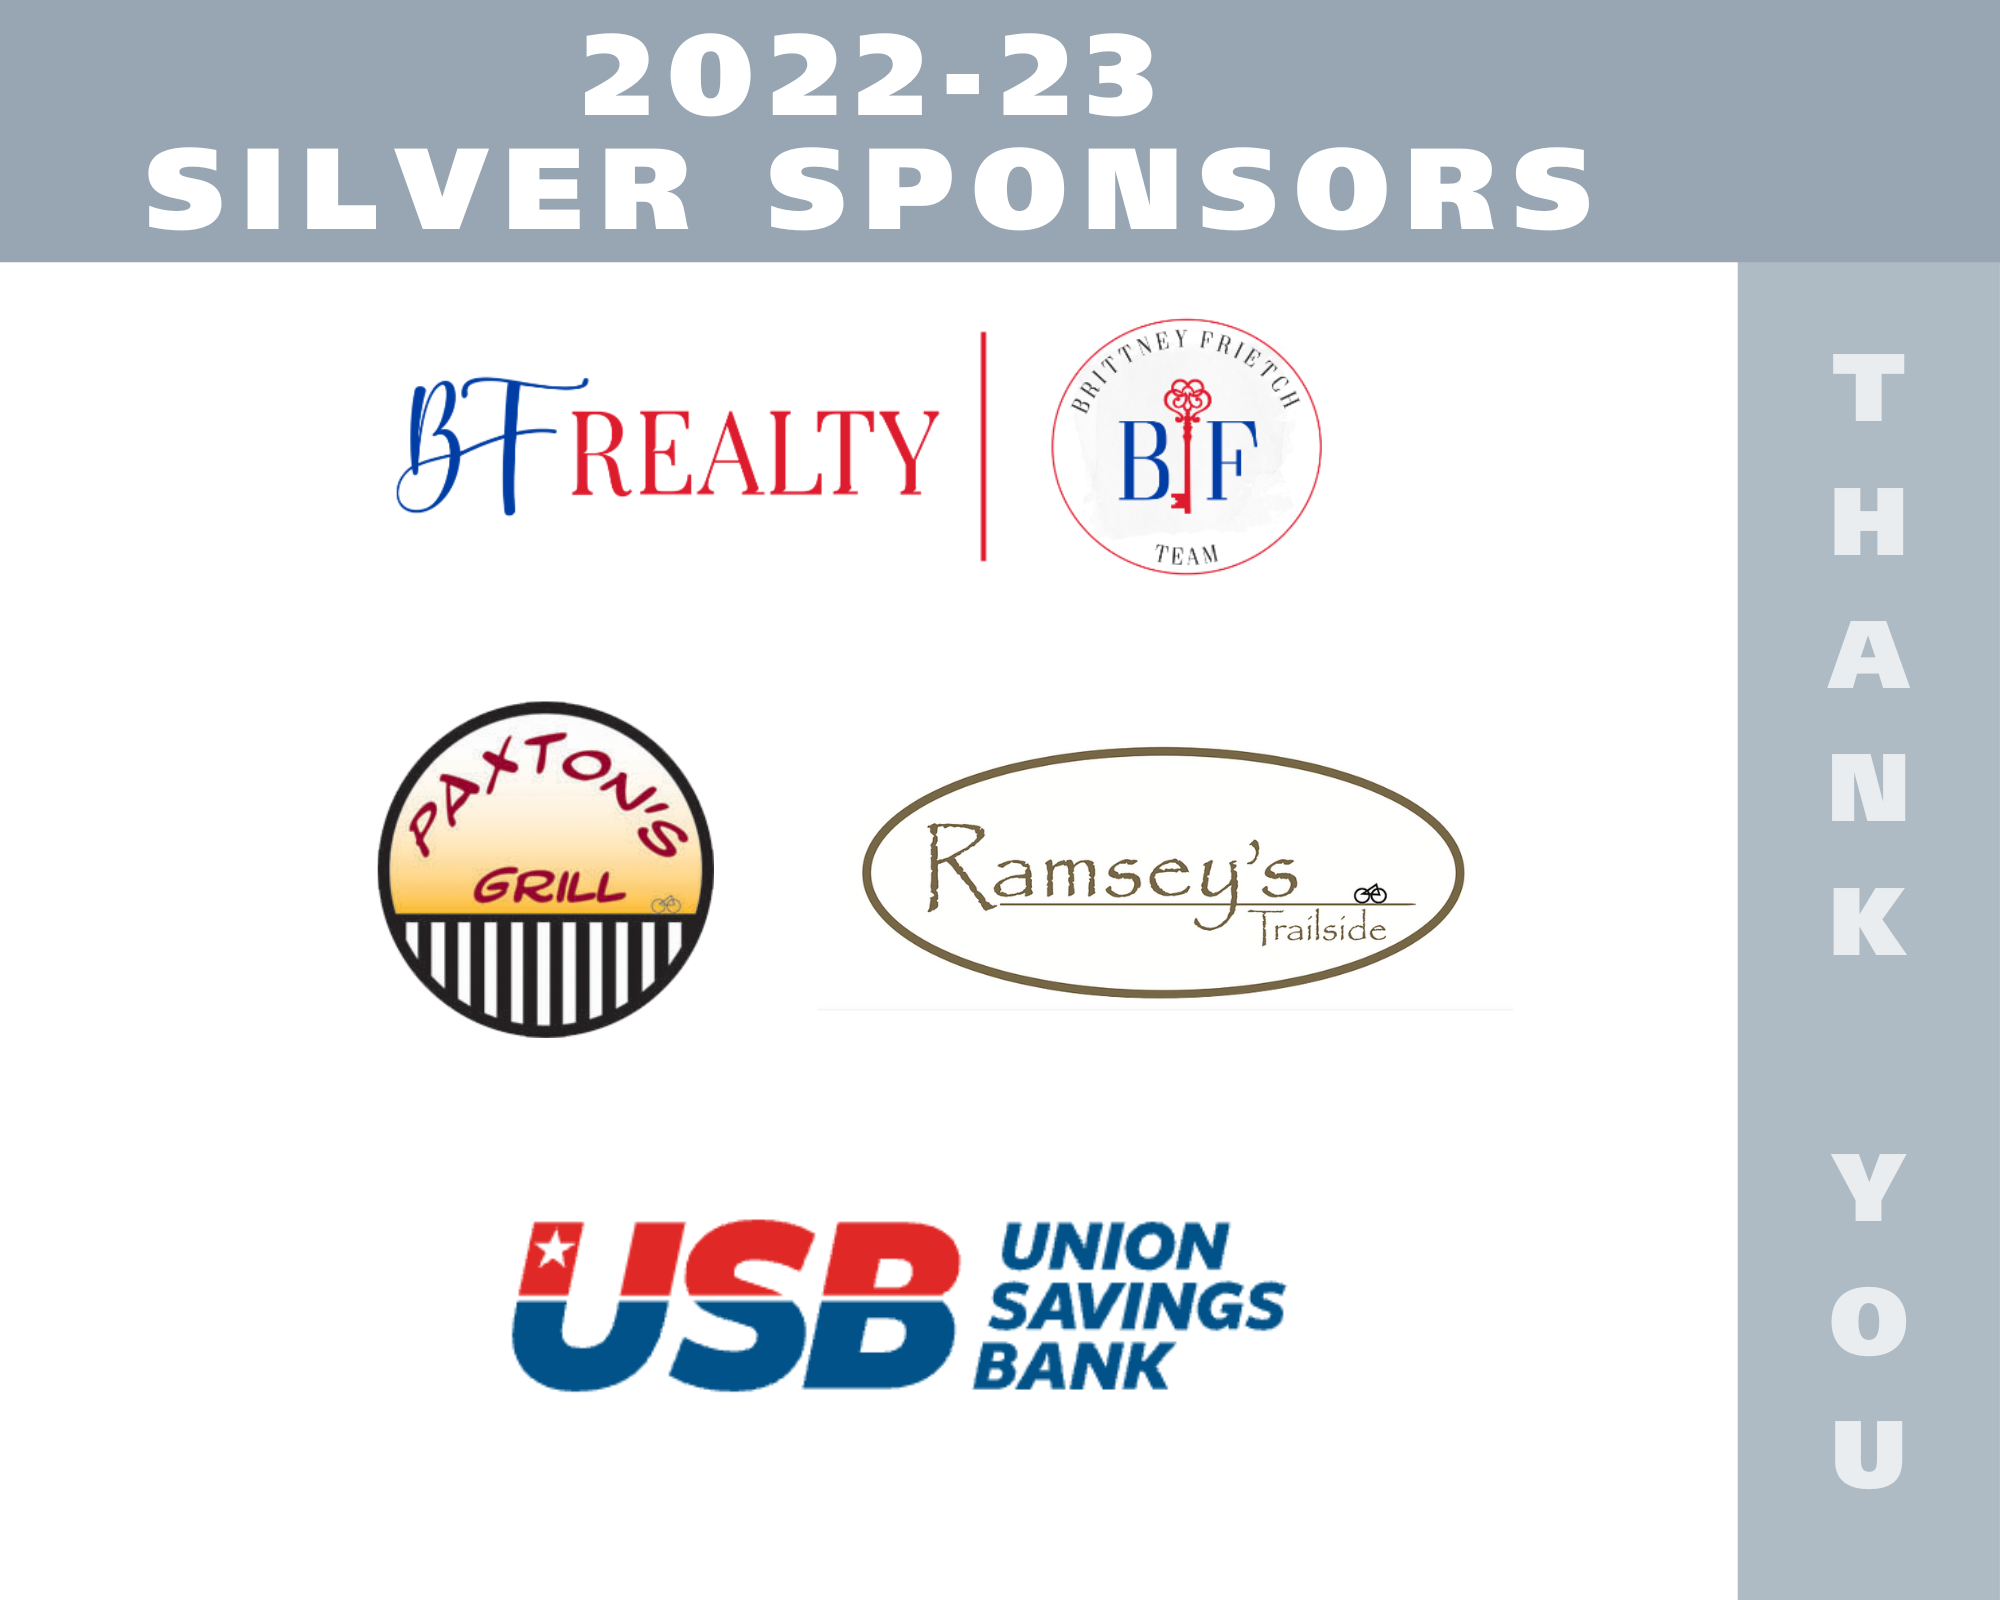 silver-sponsors-22-23.png